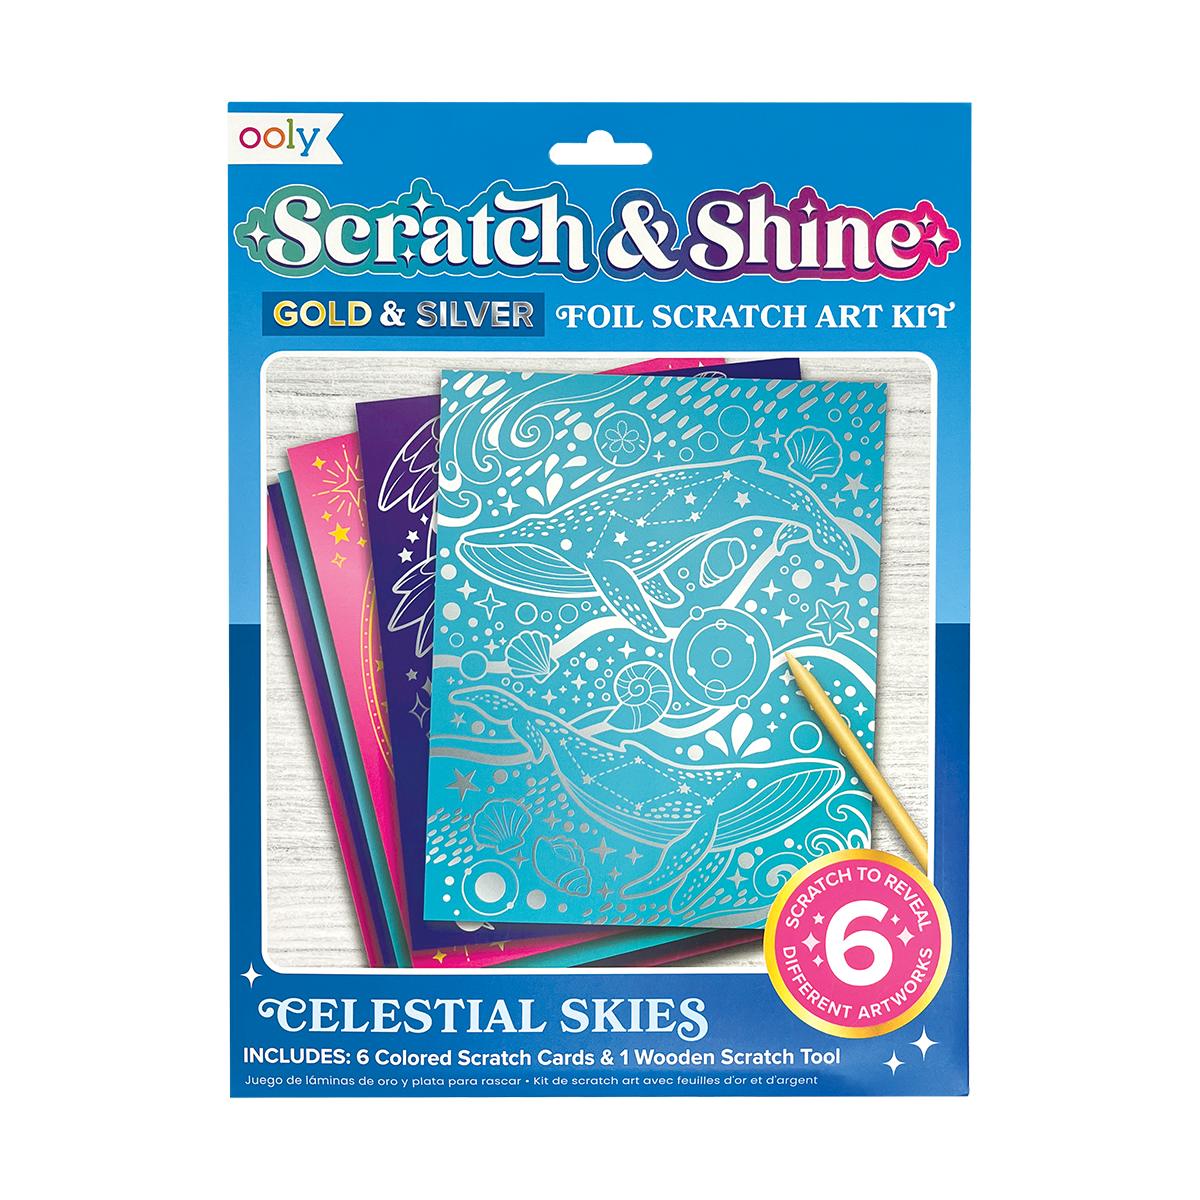 Scratch and Shine Foil Scratch Art Kit - Celestial Skies by OOLY